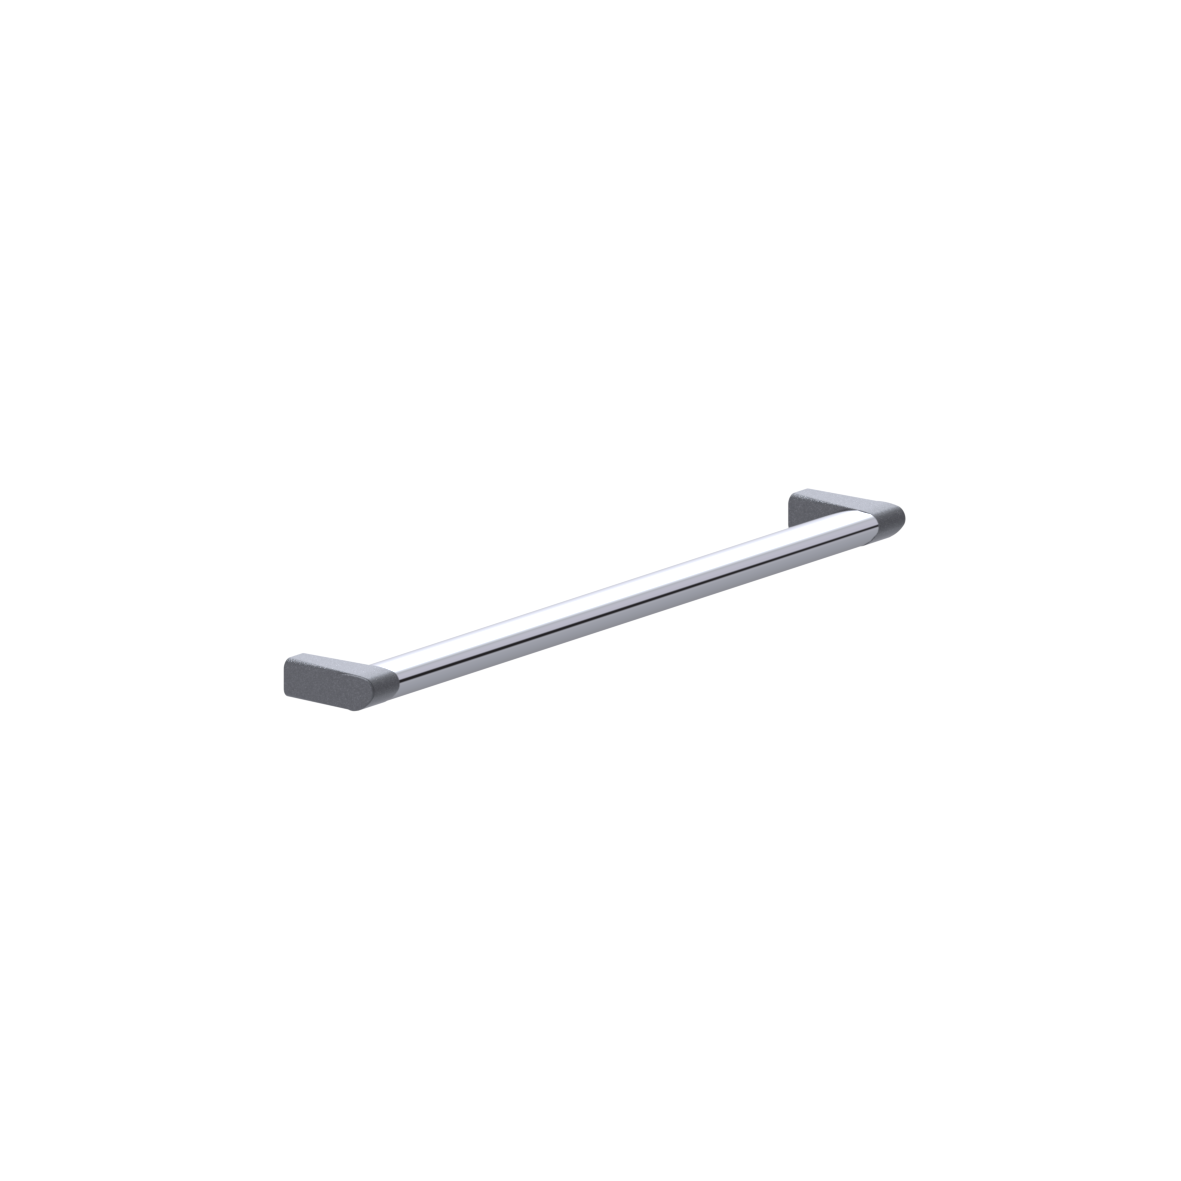 Cavere Care Chrome Shower handrail, 600 mm, single-point mounting, Chrome metallic anthracite